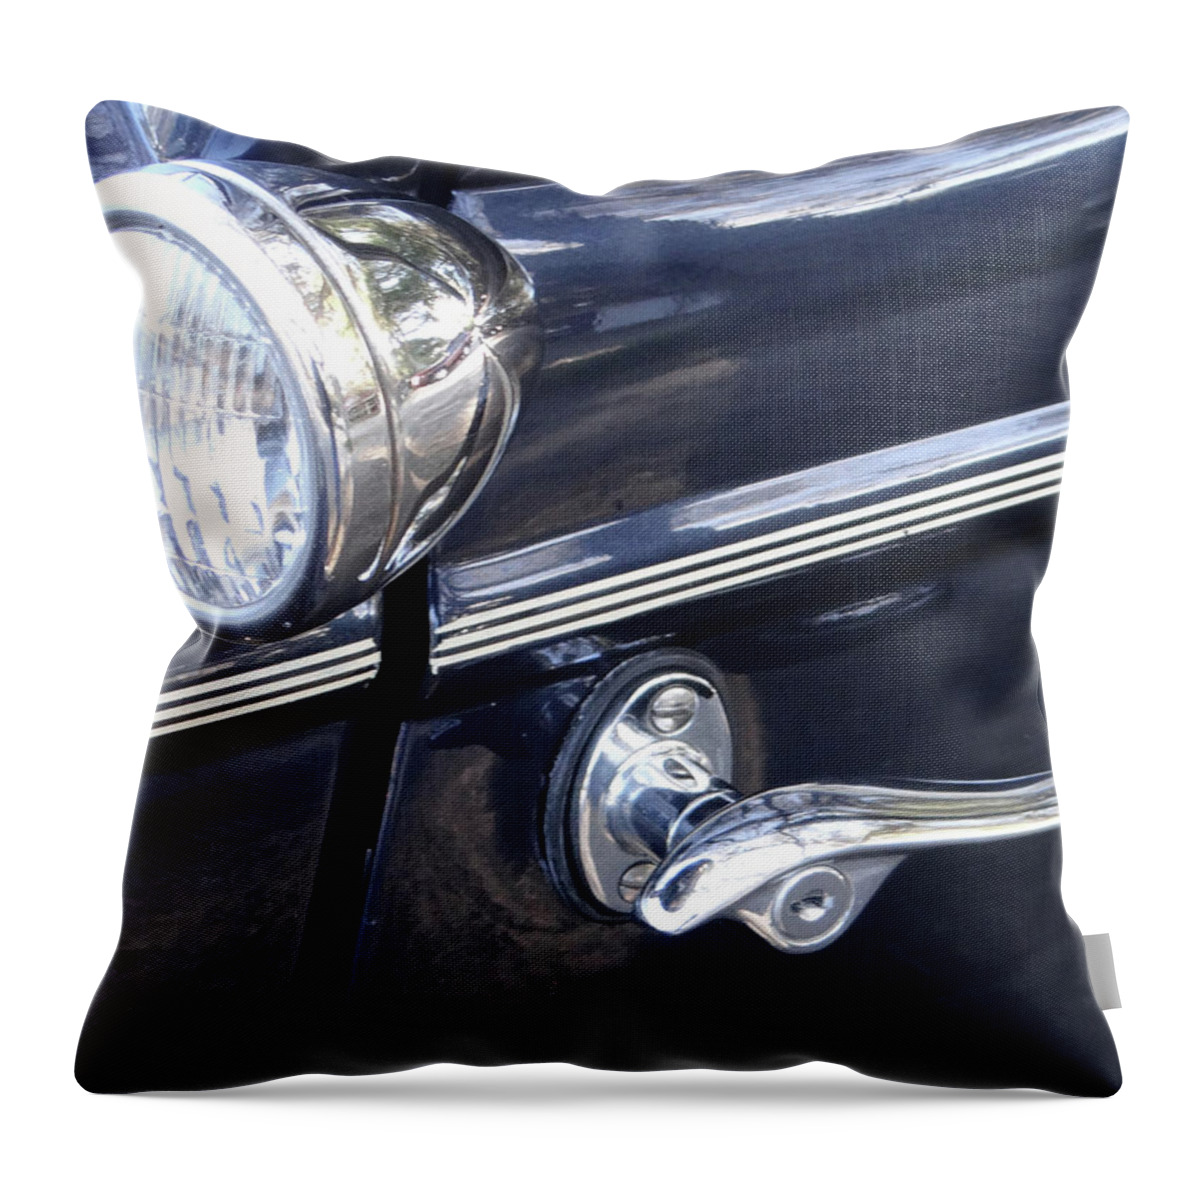 Aged Throw Pillow featuring the photograph Door by Dennis Dugan